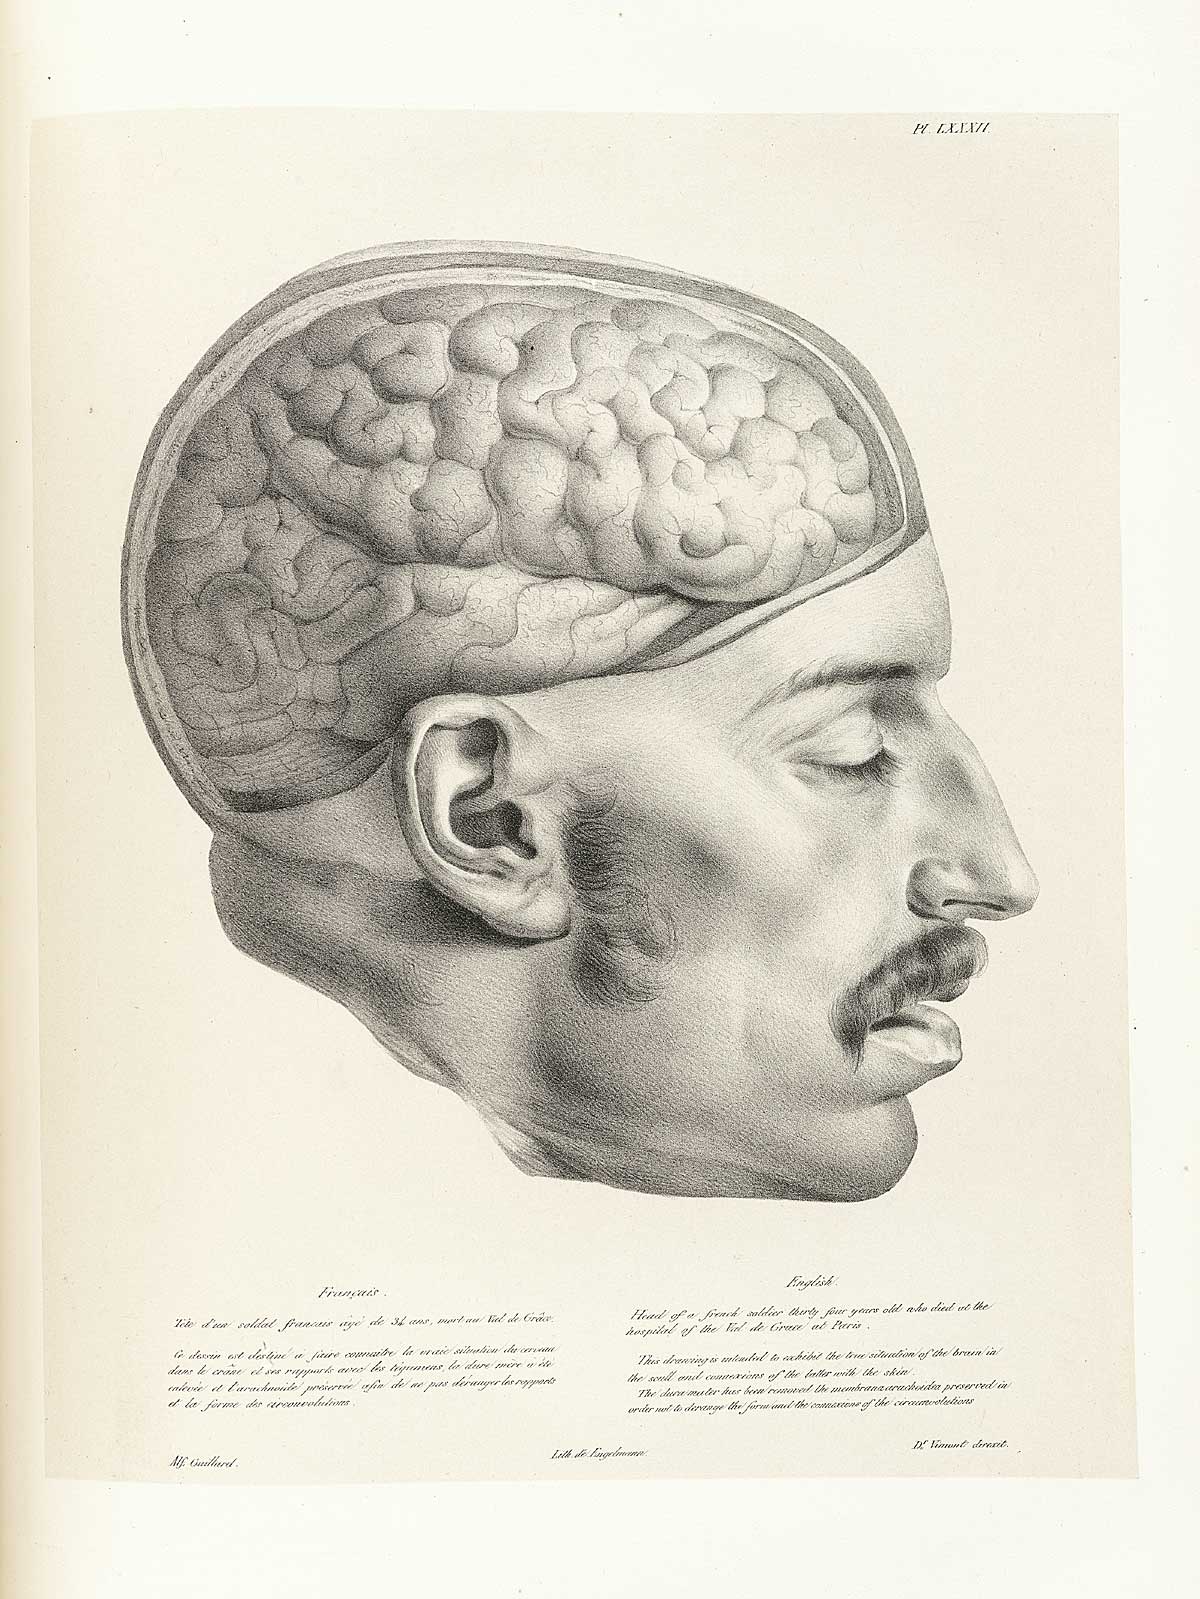 The side view of a the head of a French solider, with the dura mater removed.